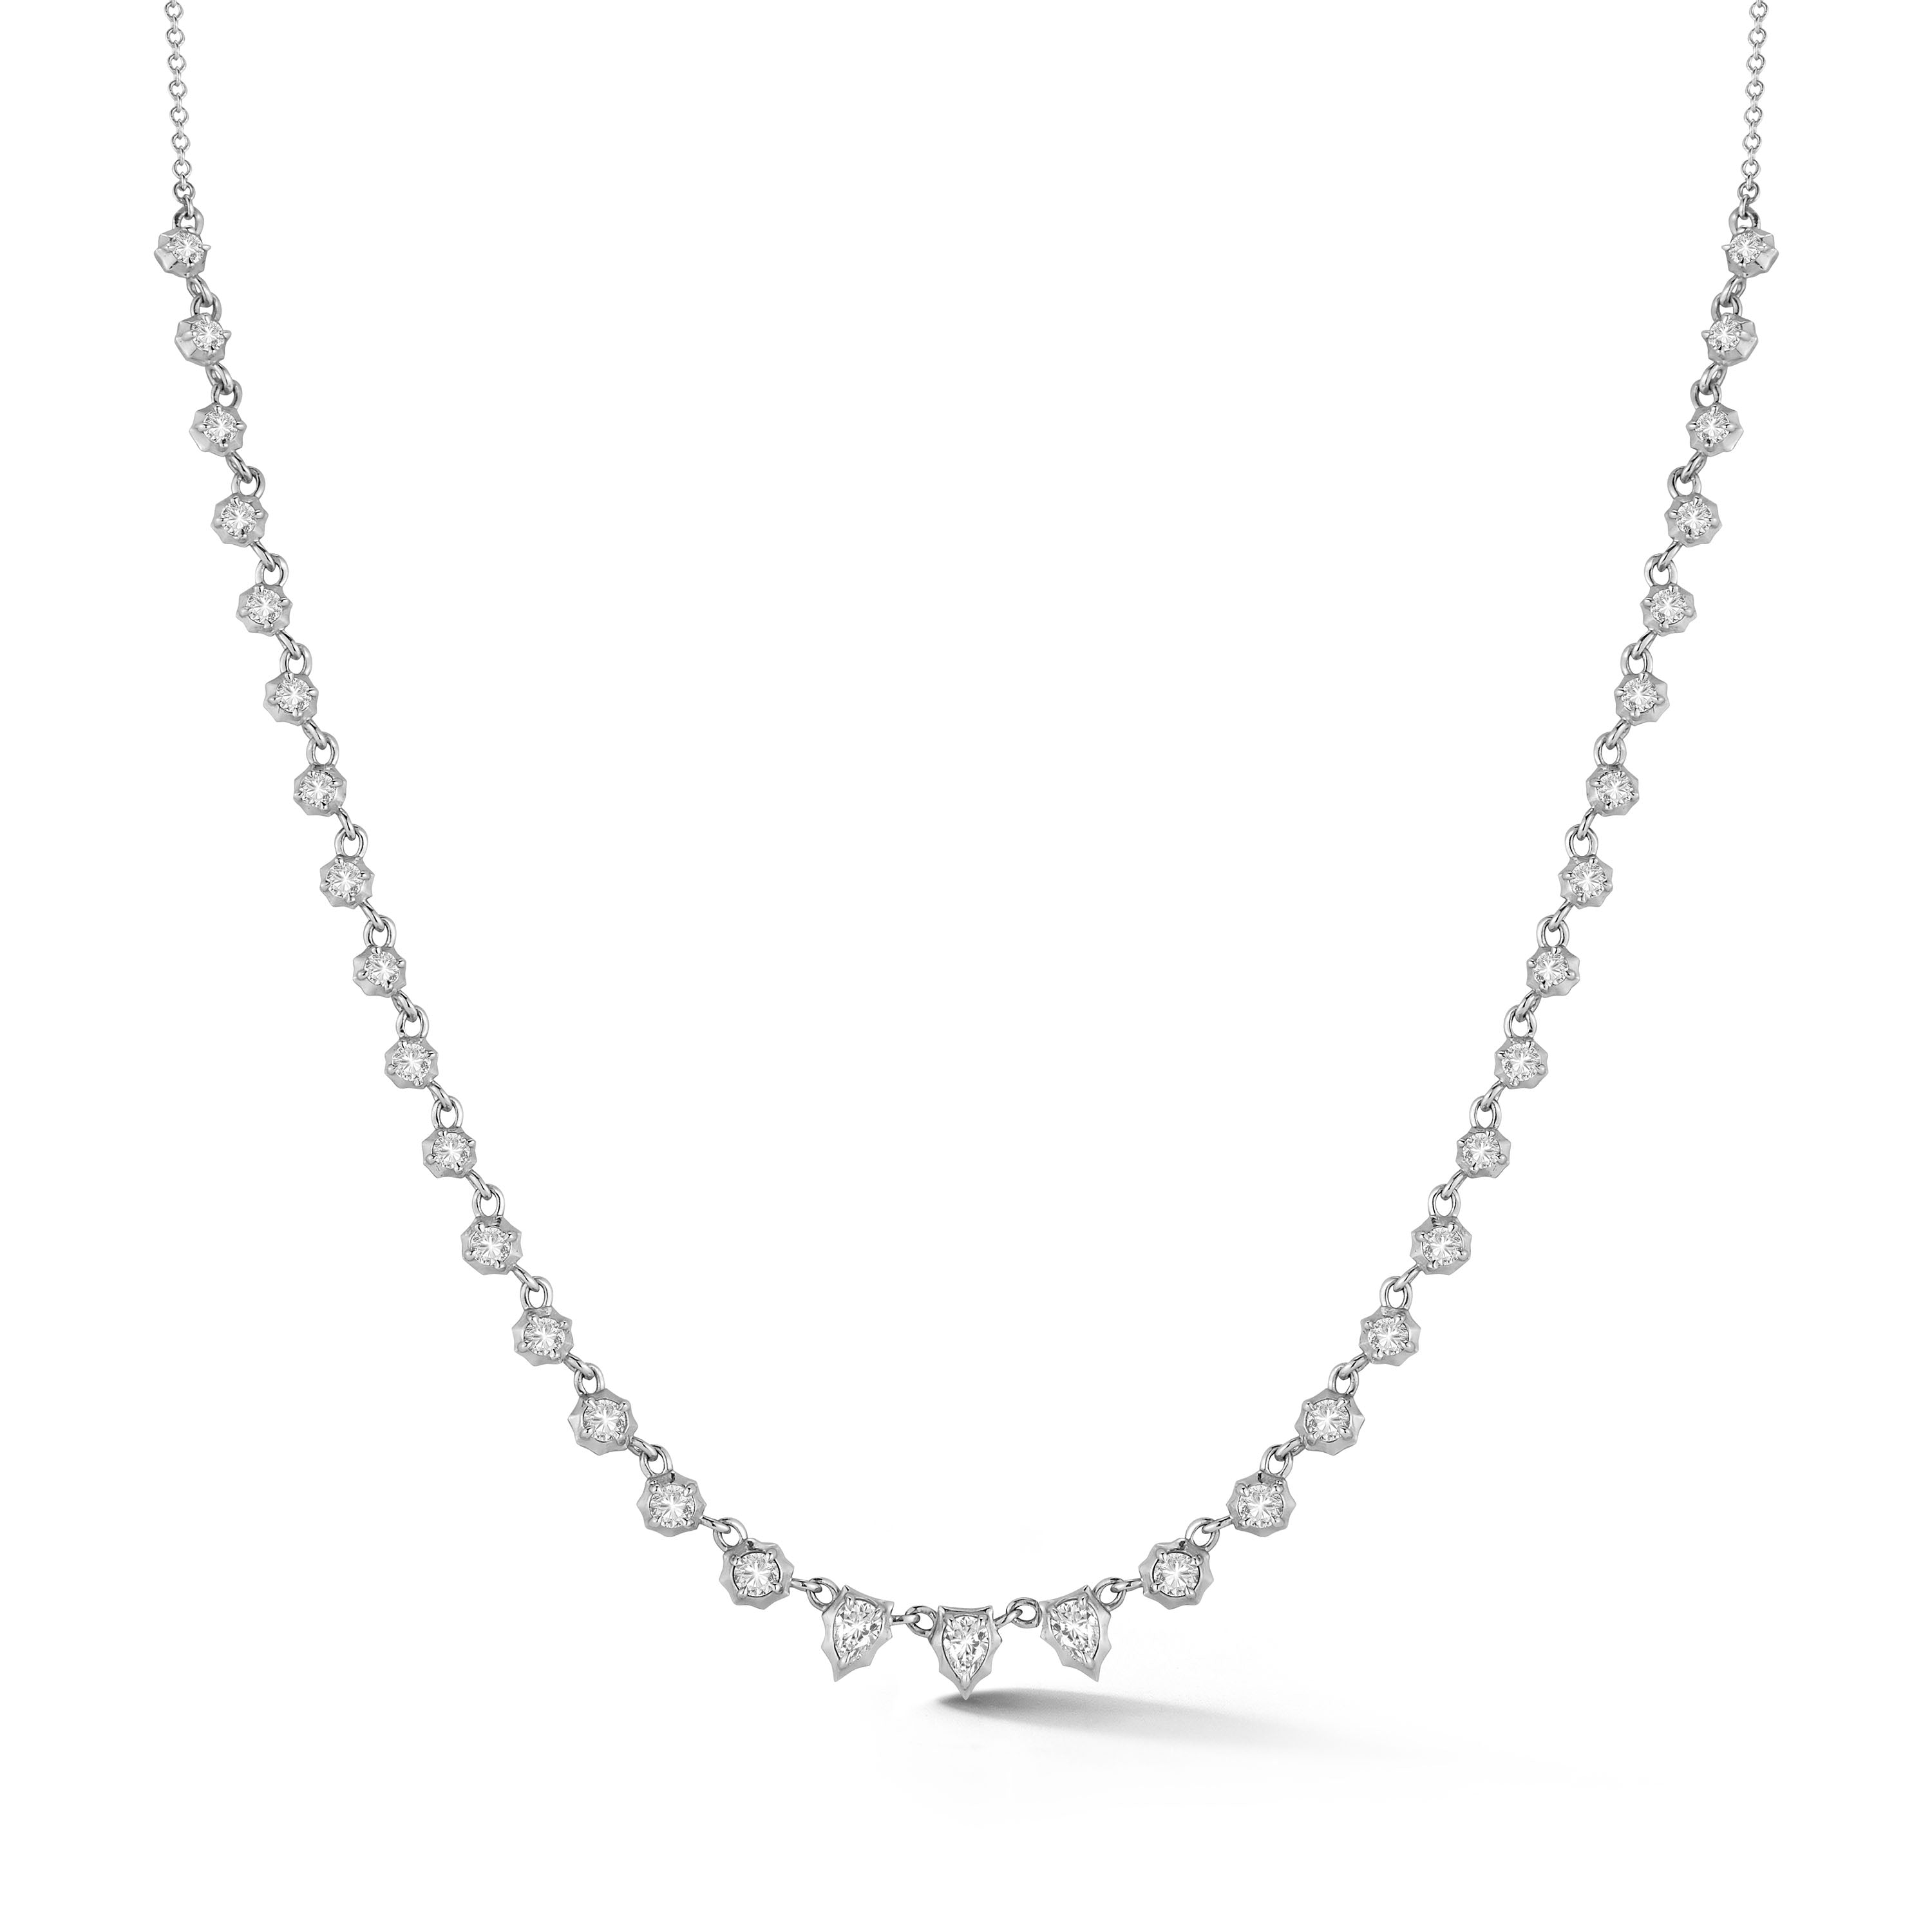 Small Envoy Riviera Necklace in 18K White Gold